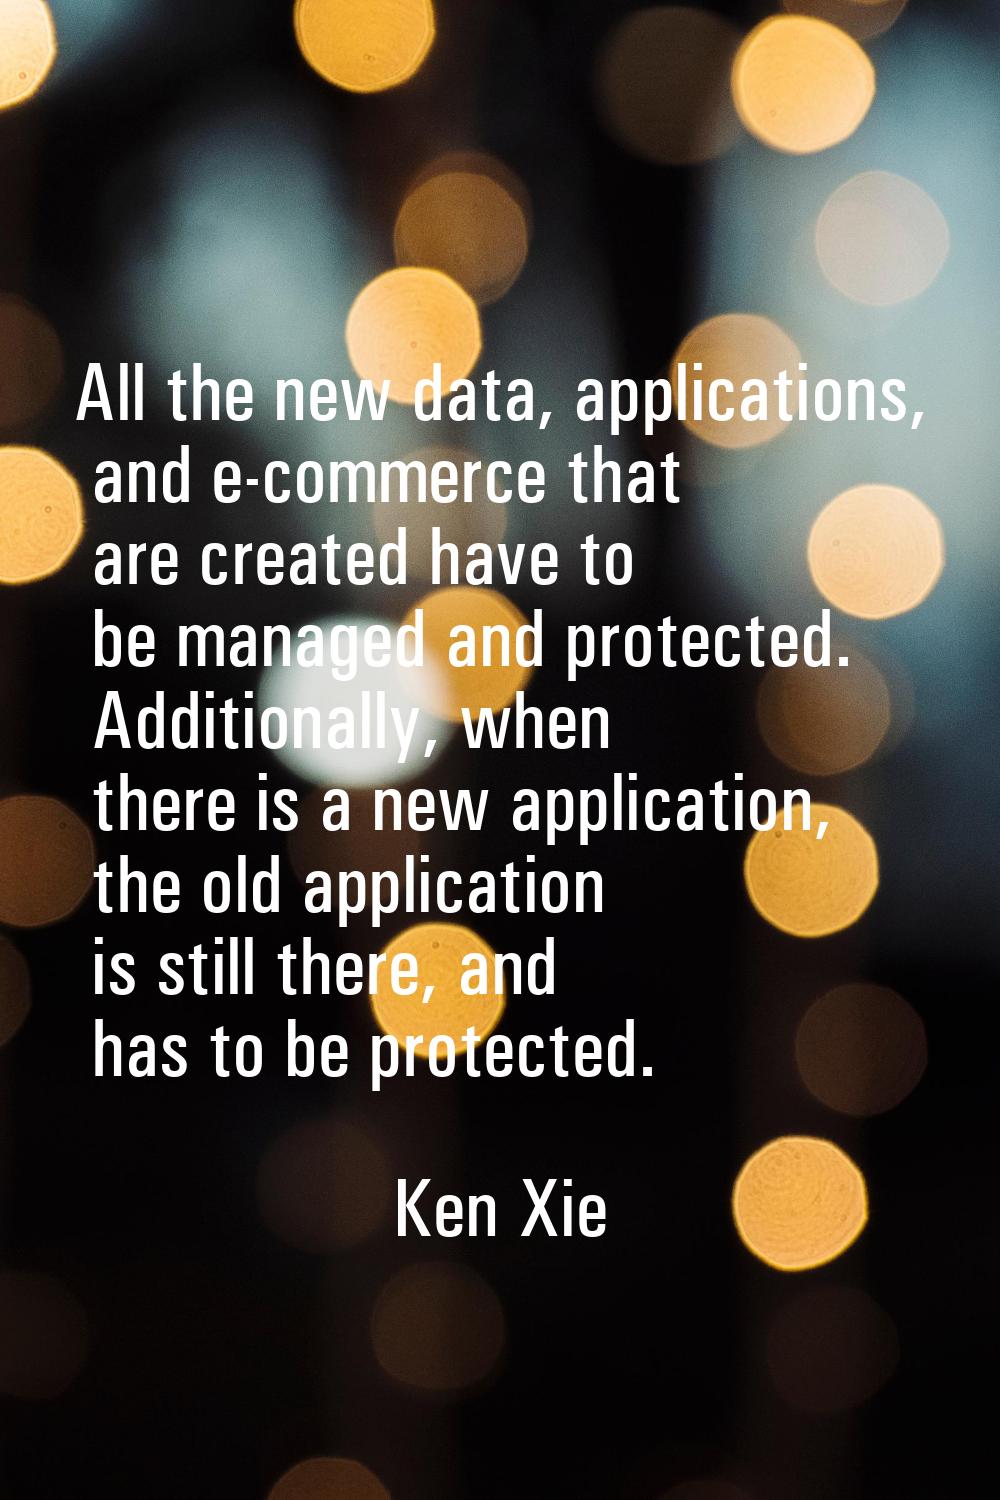 All the new data, applications, and e-commerce that are created have to be managed and protected. A